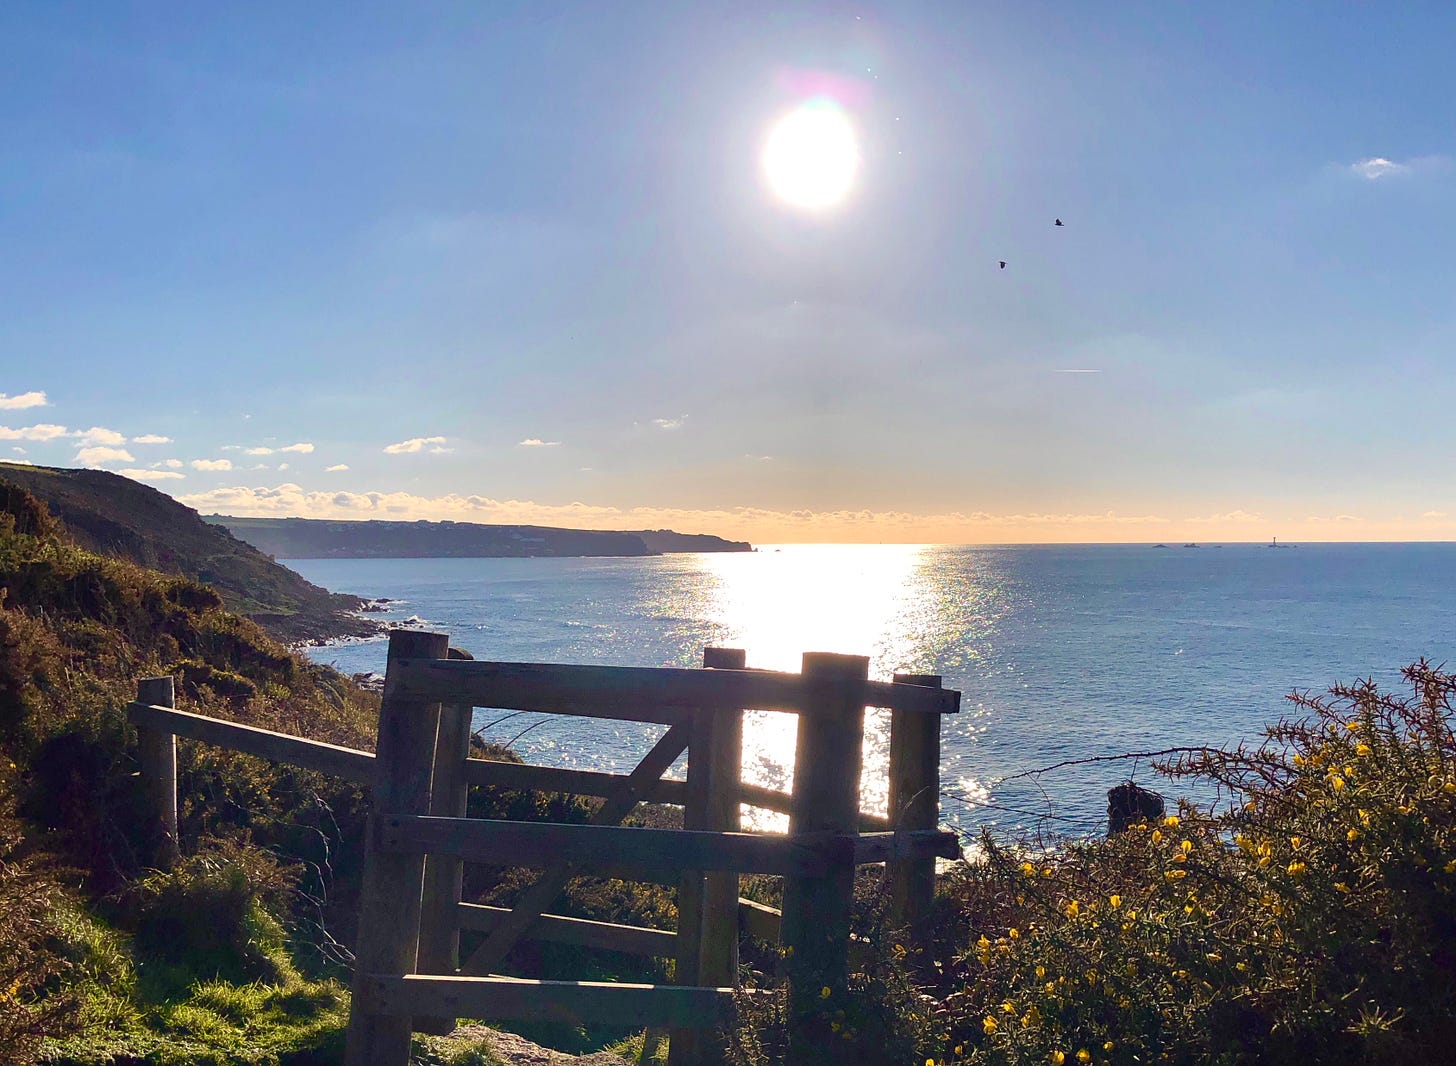 A wooden gate on the coast path. The sun is shining brightly and reflecting off the blue sea.